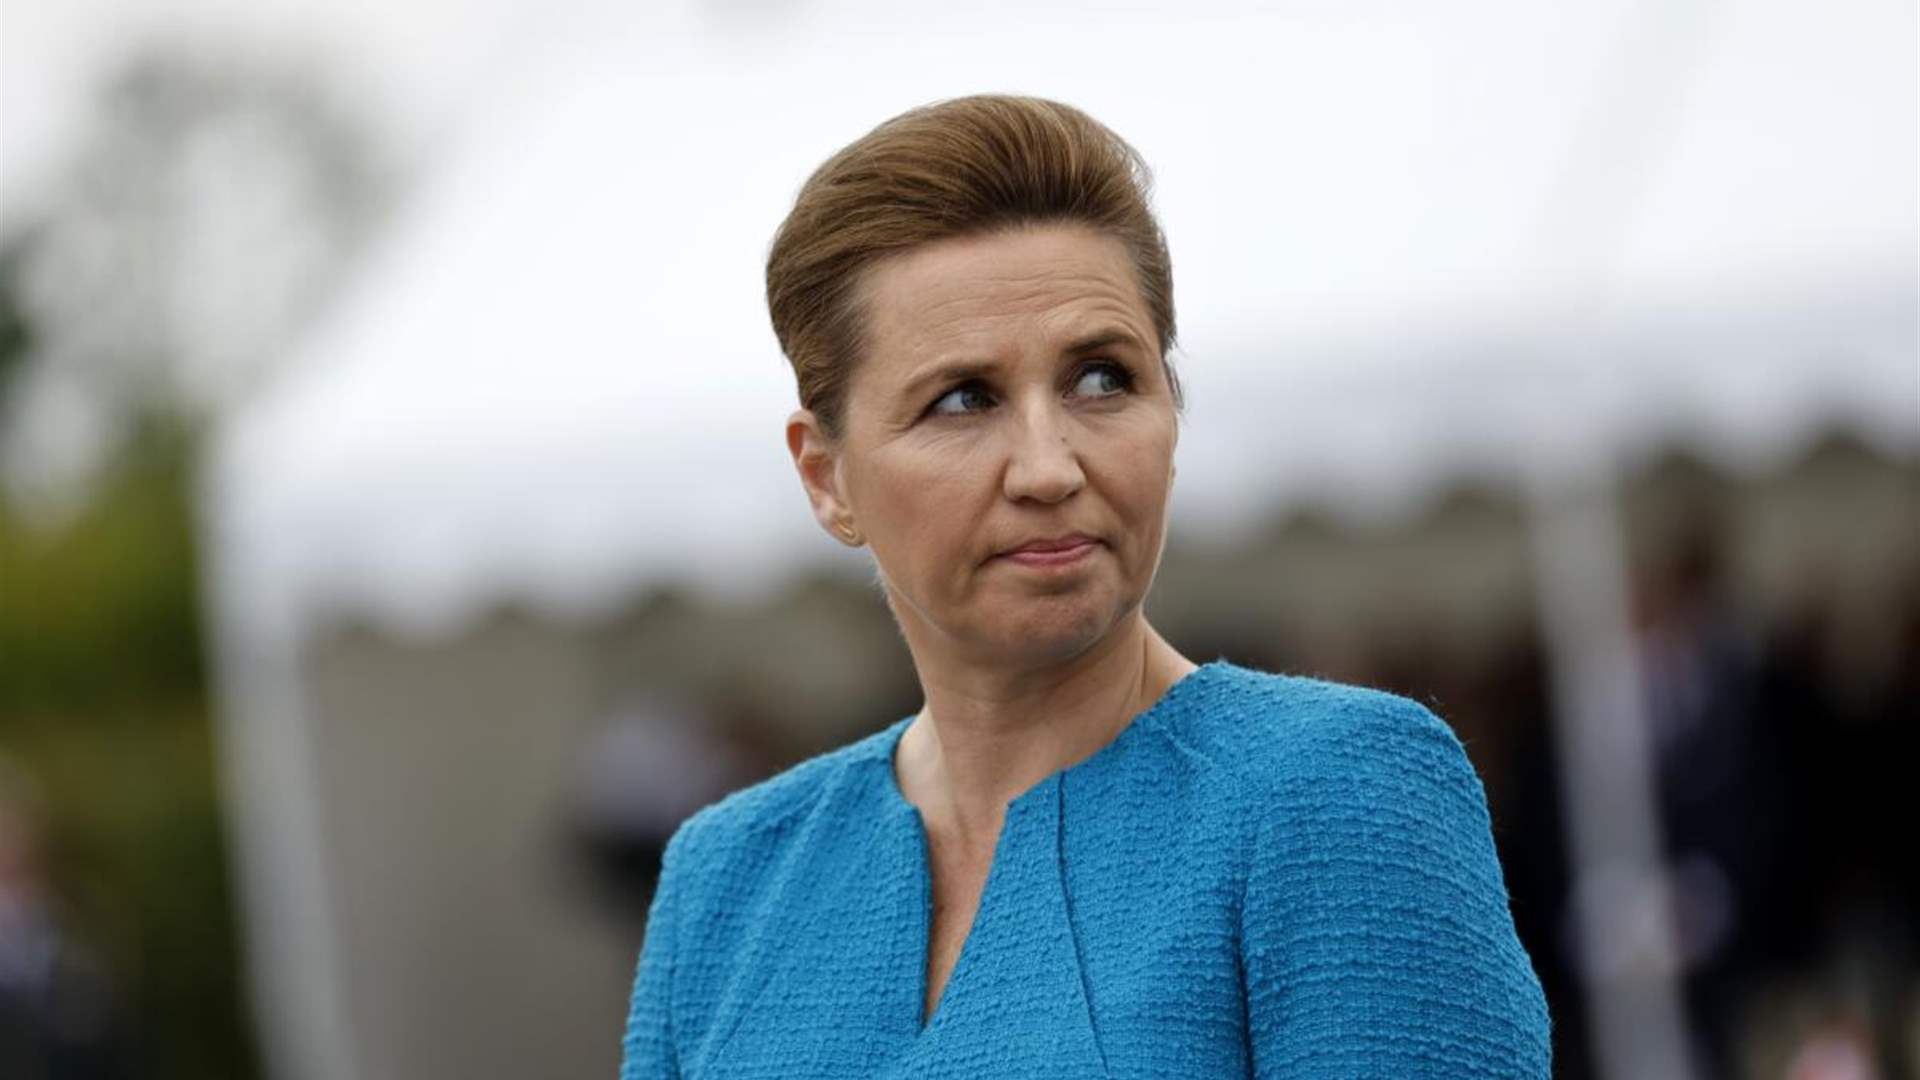 Man suspected of hitting Danish PM to appear in court 